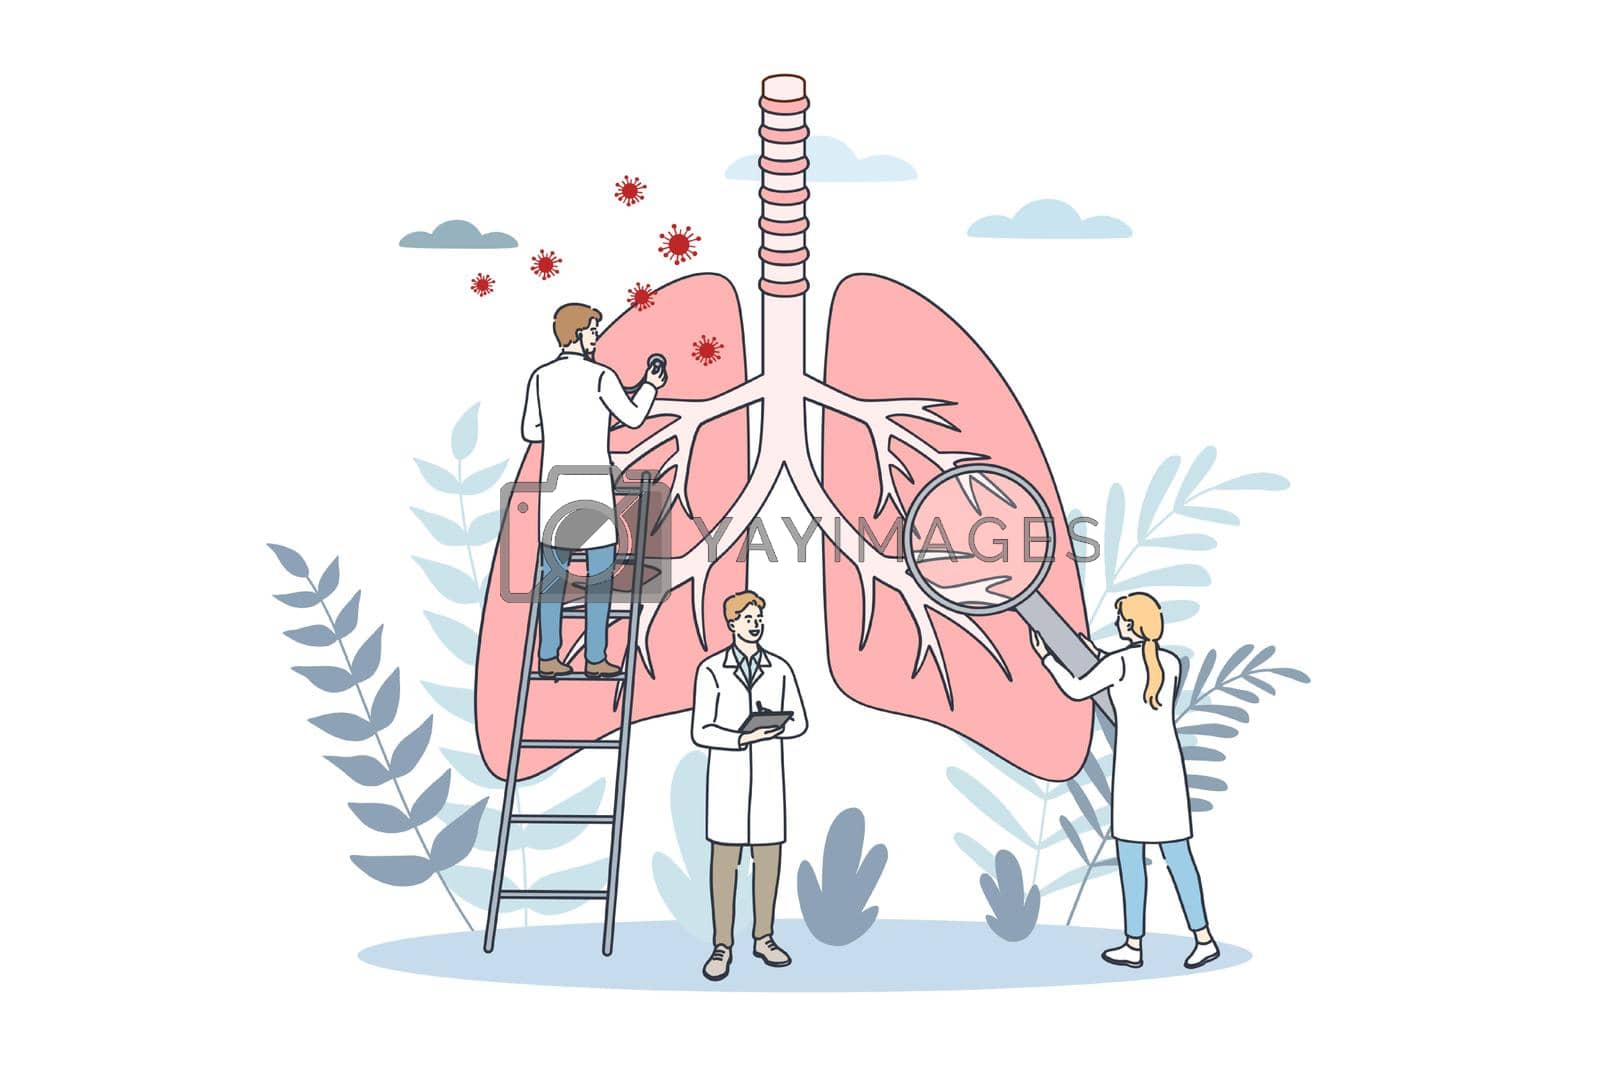 Pulmonology and lungs healthcare concept. Young doctors cartoon characters in white uniform examining lungs and respiratory system for Internal organ inspection check for illness, disease or problems